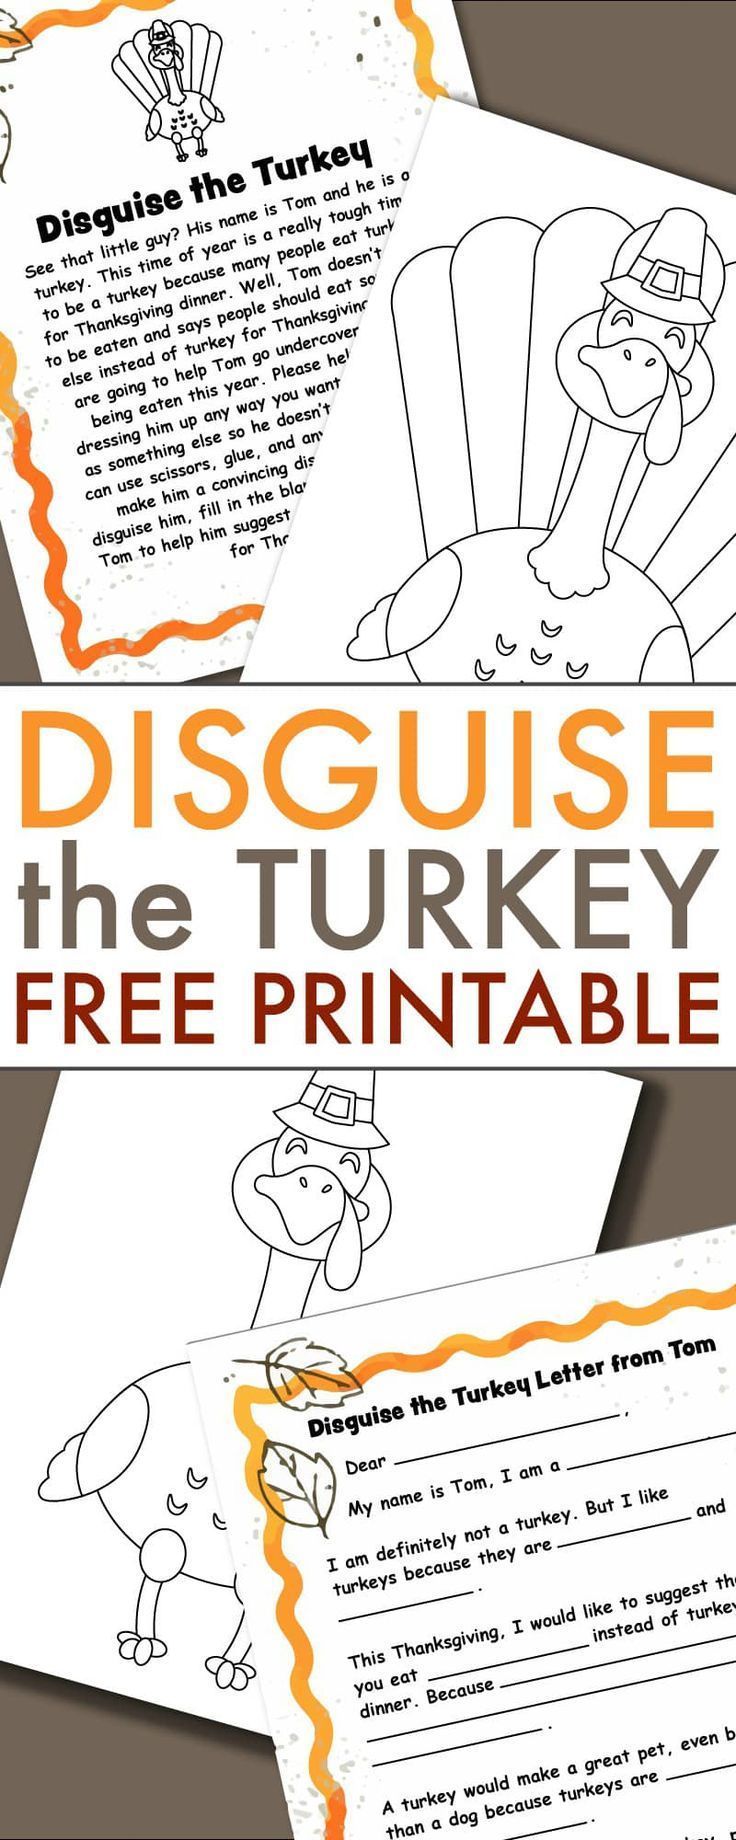 A Turkey in Disguise Project Free Printable Template - A Turkey in Disguise Project Free Printable Template -   18 disguise a turkey project printable template ideas